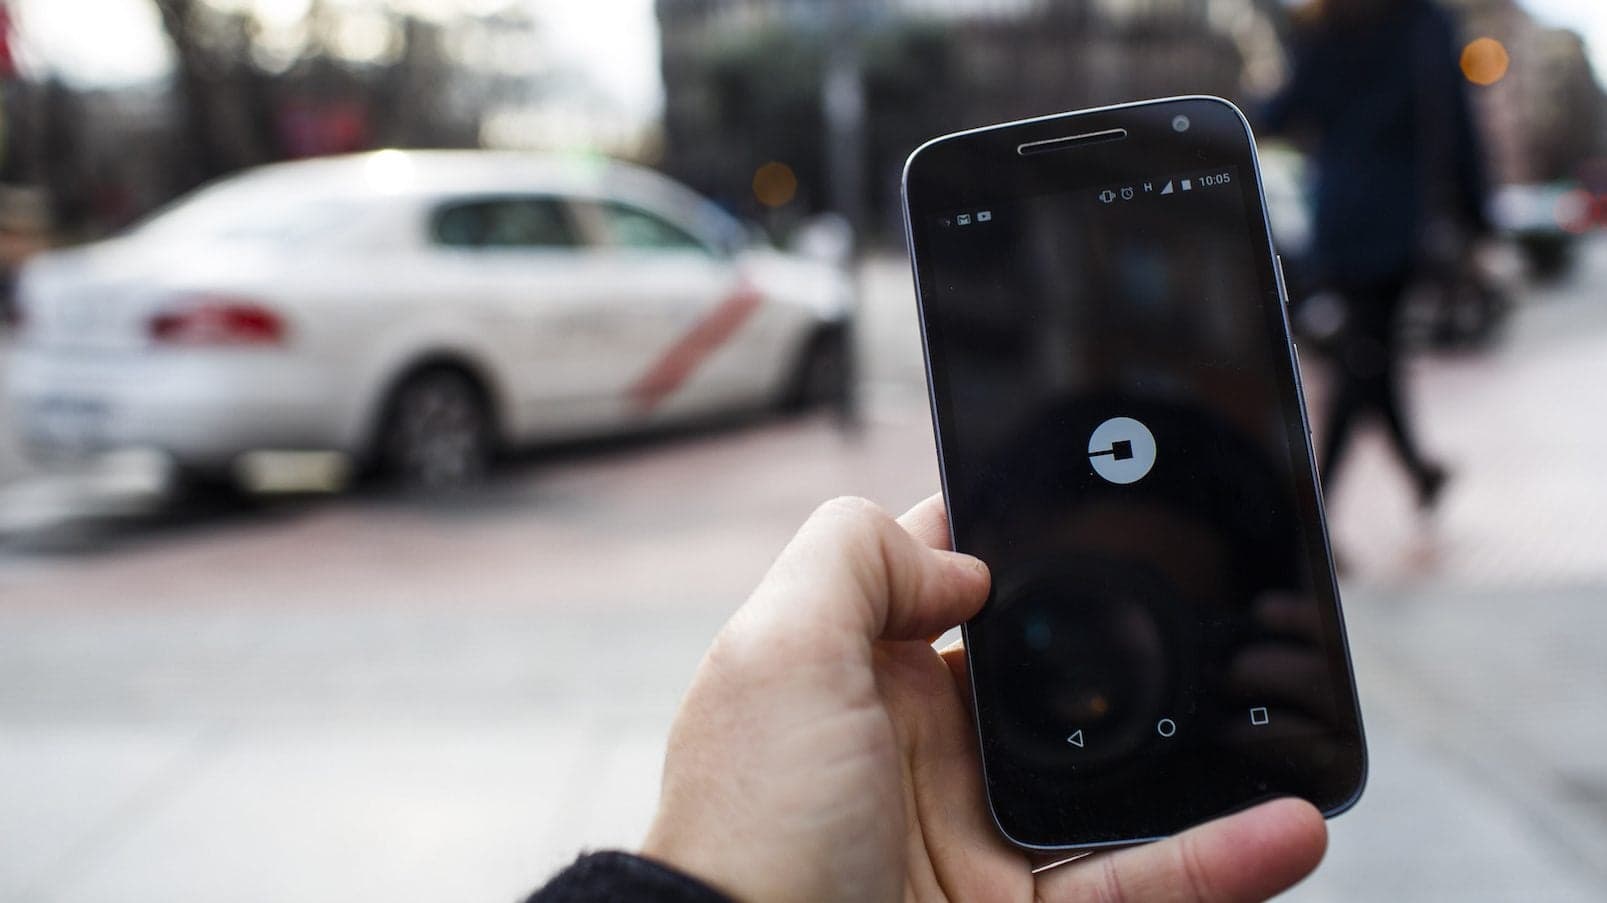 Uber Tells Users Deleting Accounts the Ride-Hailing Company Is “Deeply Hurting”